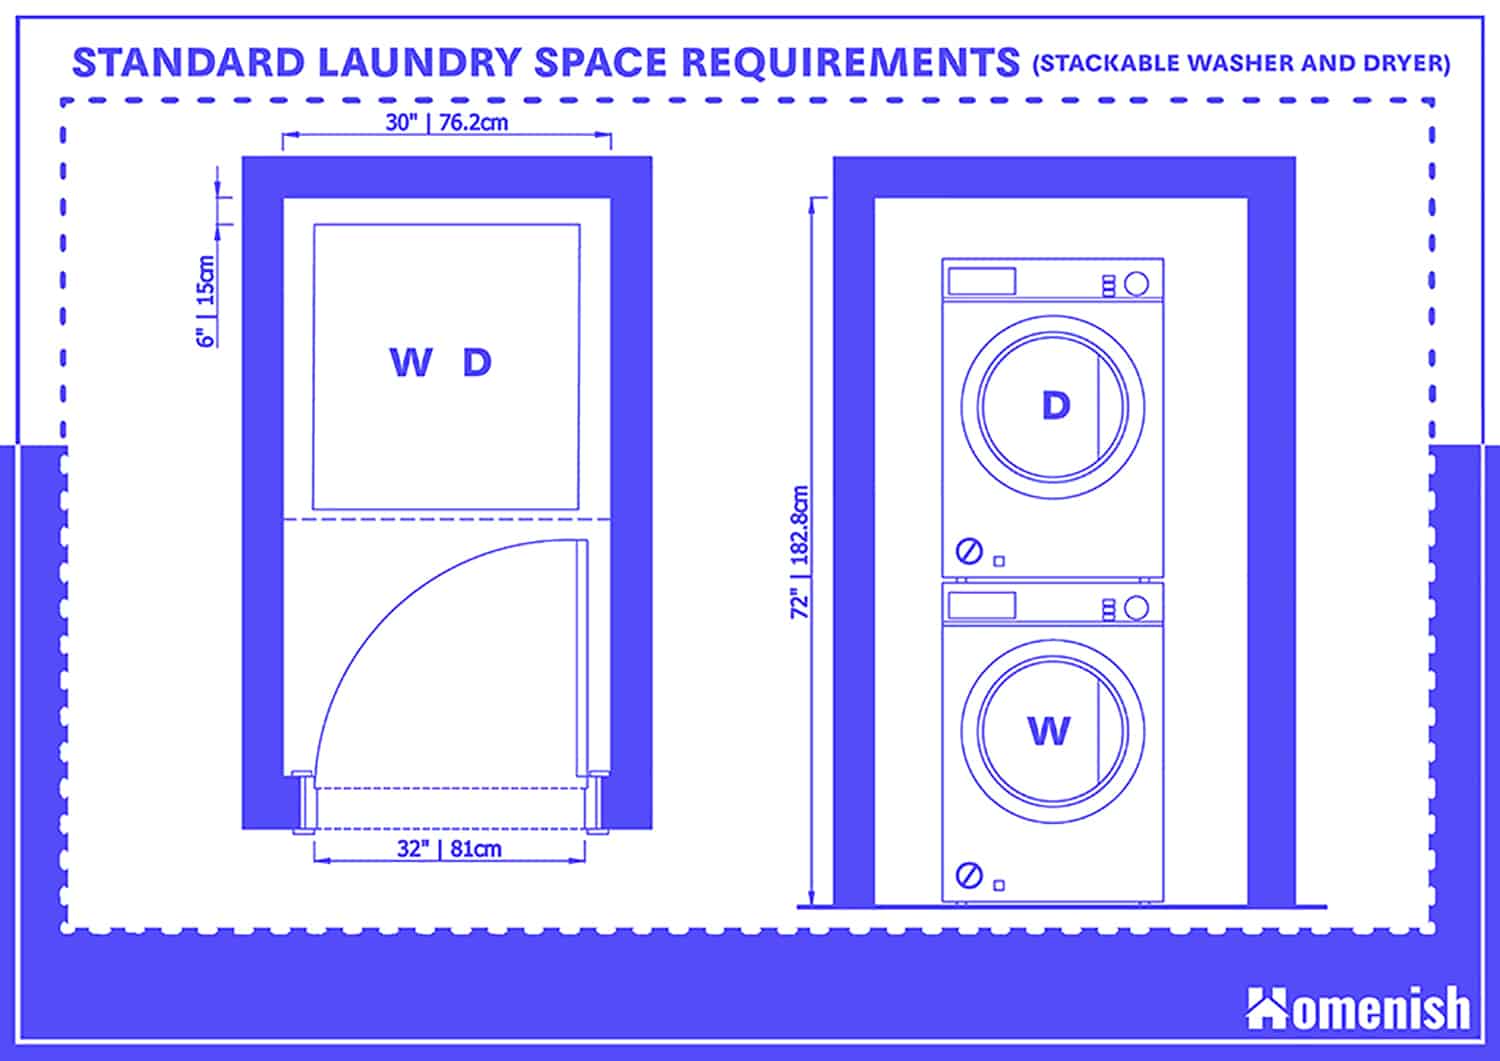 Standard Laundry Space Requirements - Stackable Washer and Dryer